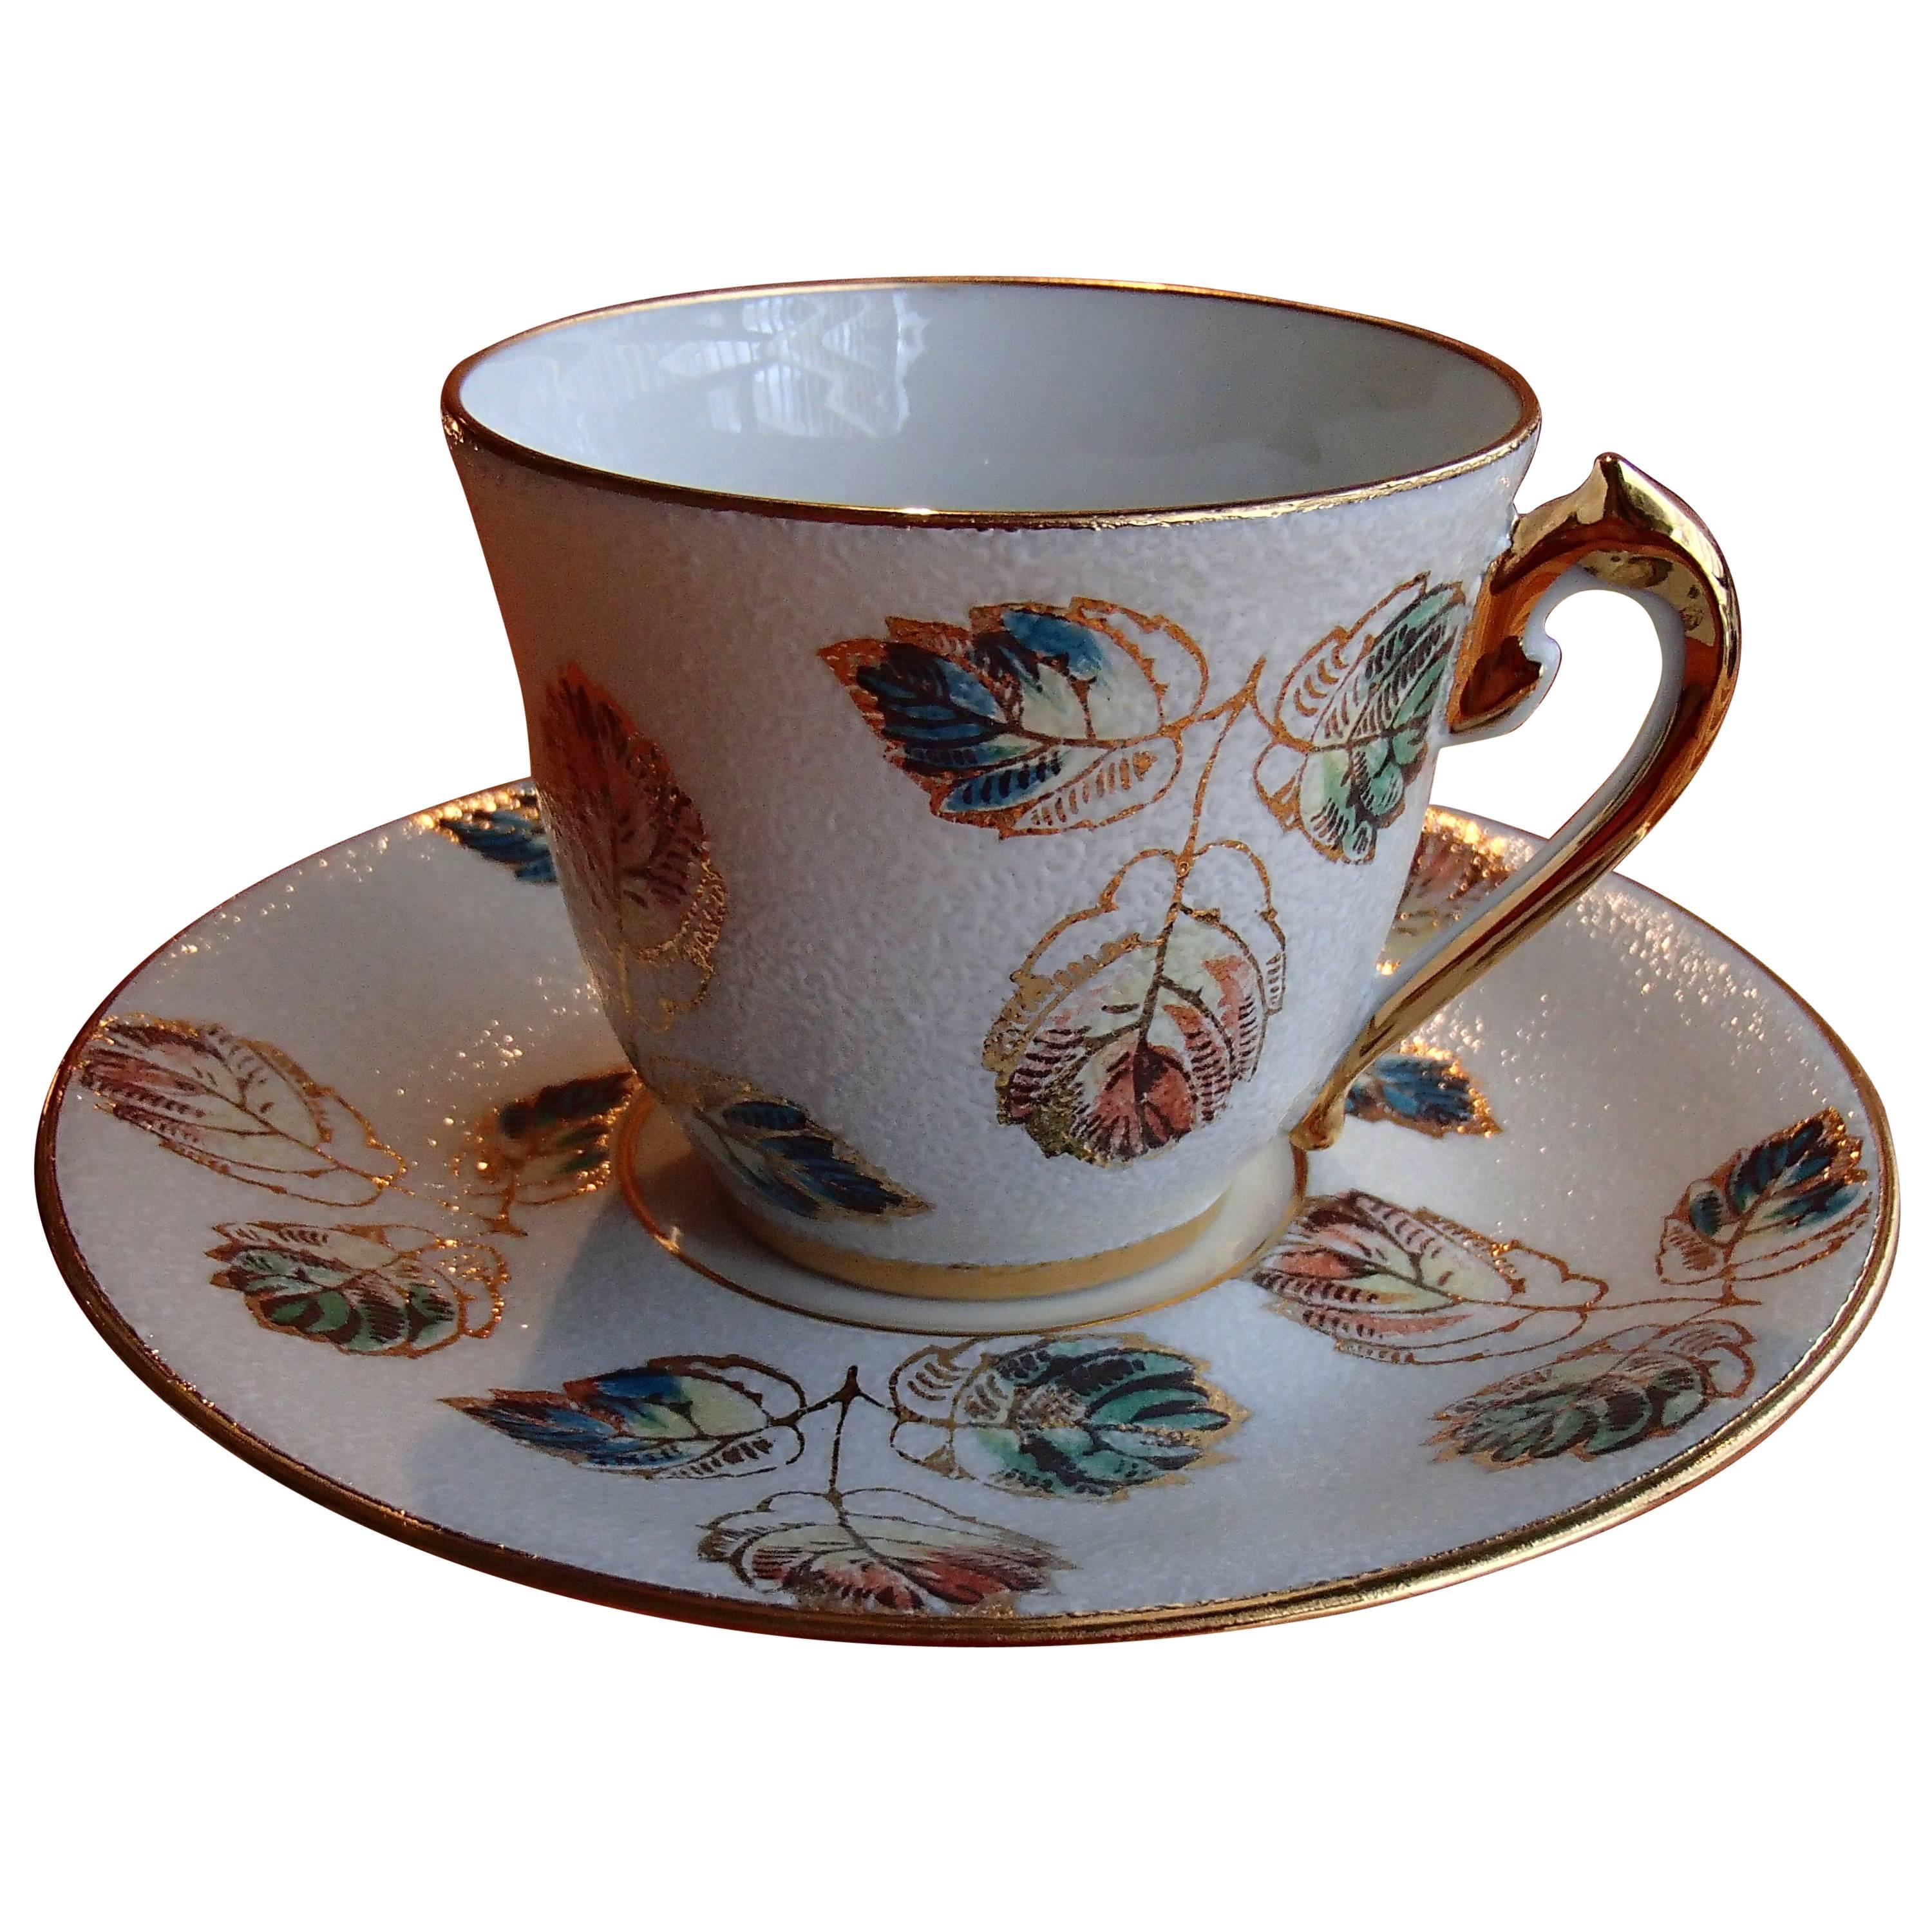 20th Century Limoges Hand-Painted Porcelain Coffee Cup by R.Leclair